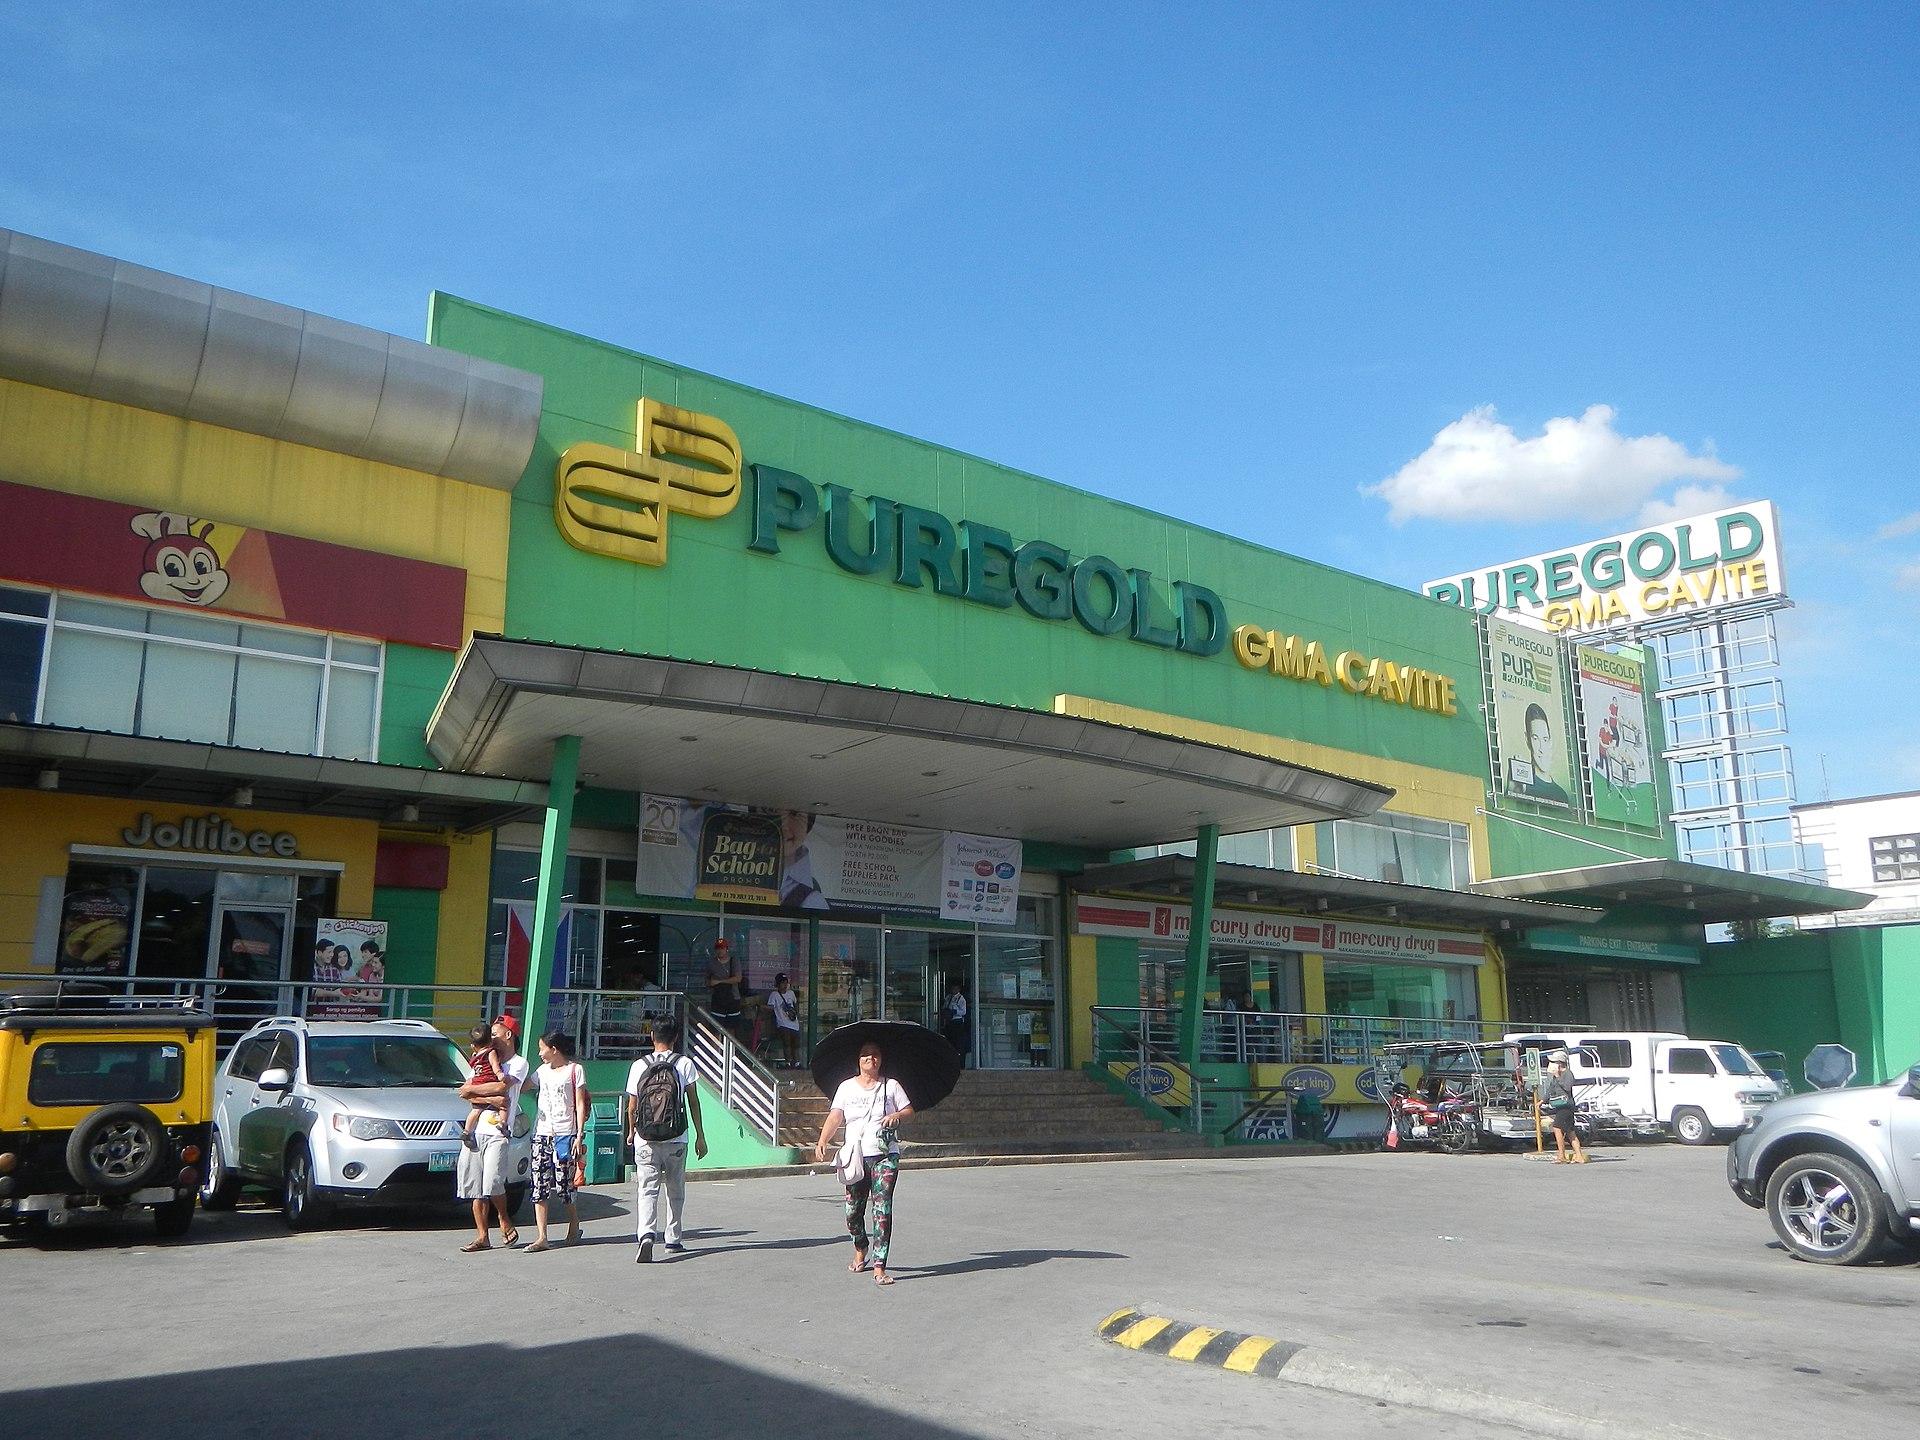 Chinese-owned businesses in the Philippines - Puregold